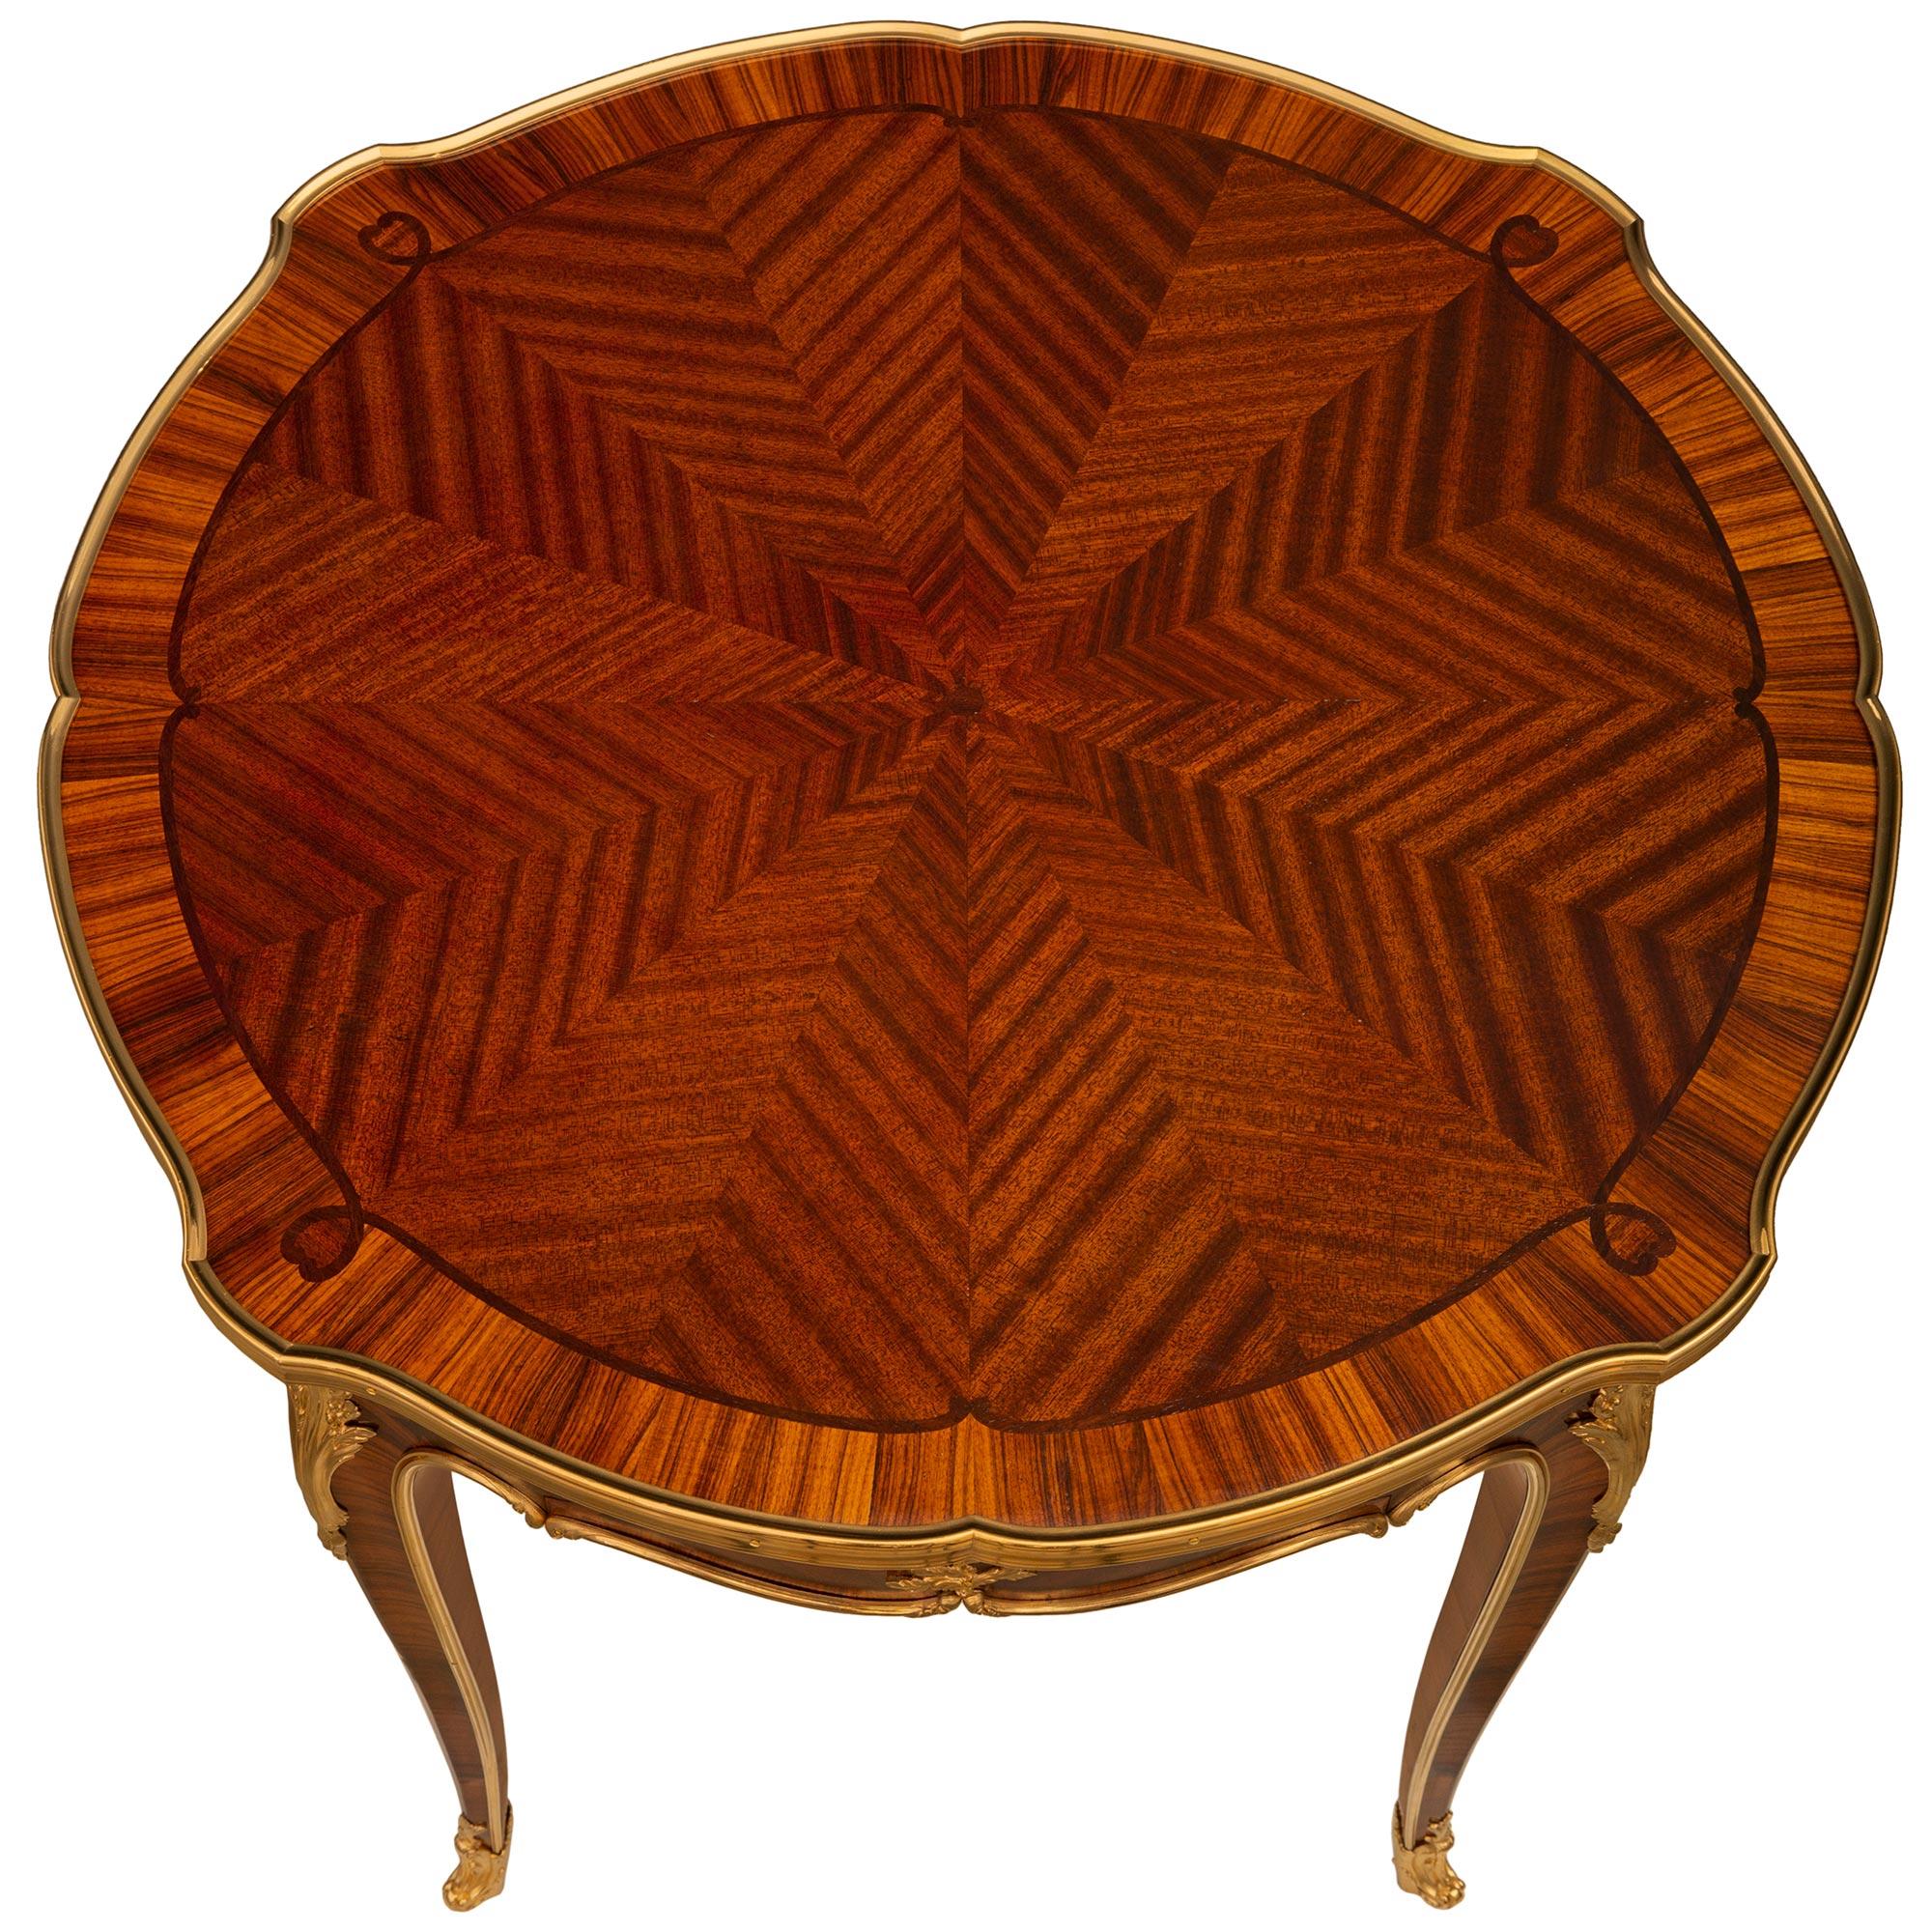 A beautiful French 19th century Louis XV st. Tulipwood, Kingwood and Ormolu side table, signed Krieger, Paris. This wonderful piece is raised on four square tapered slender legs with wrap around Ormolu sabots. The outer edge of each leg has a